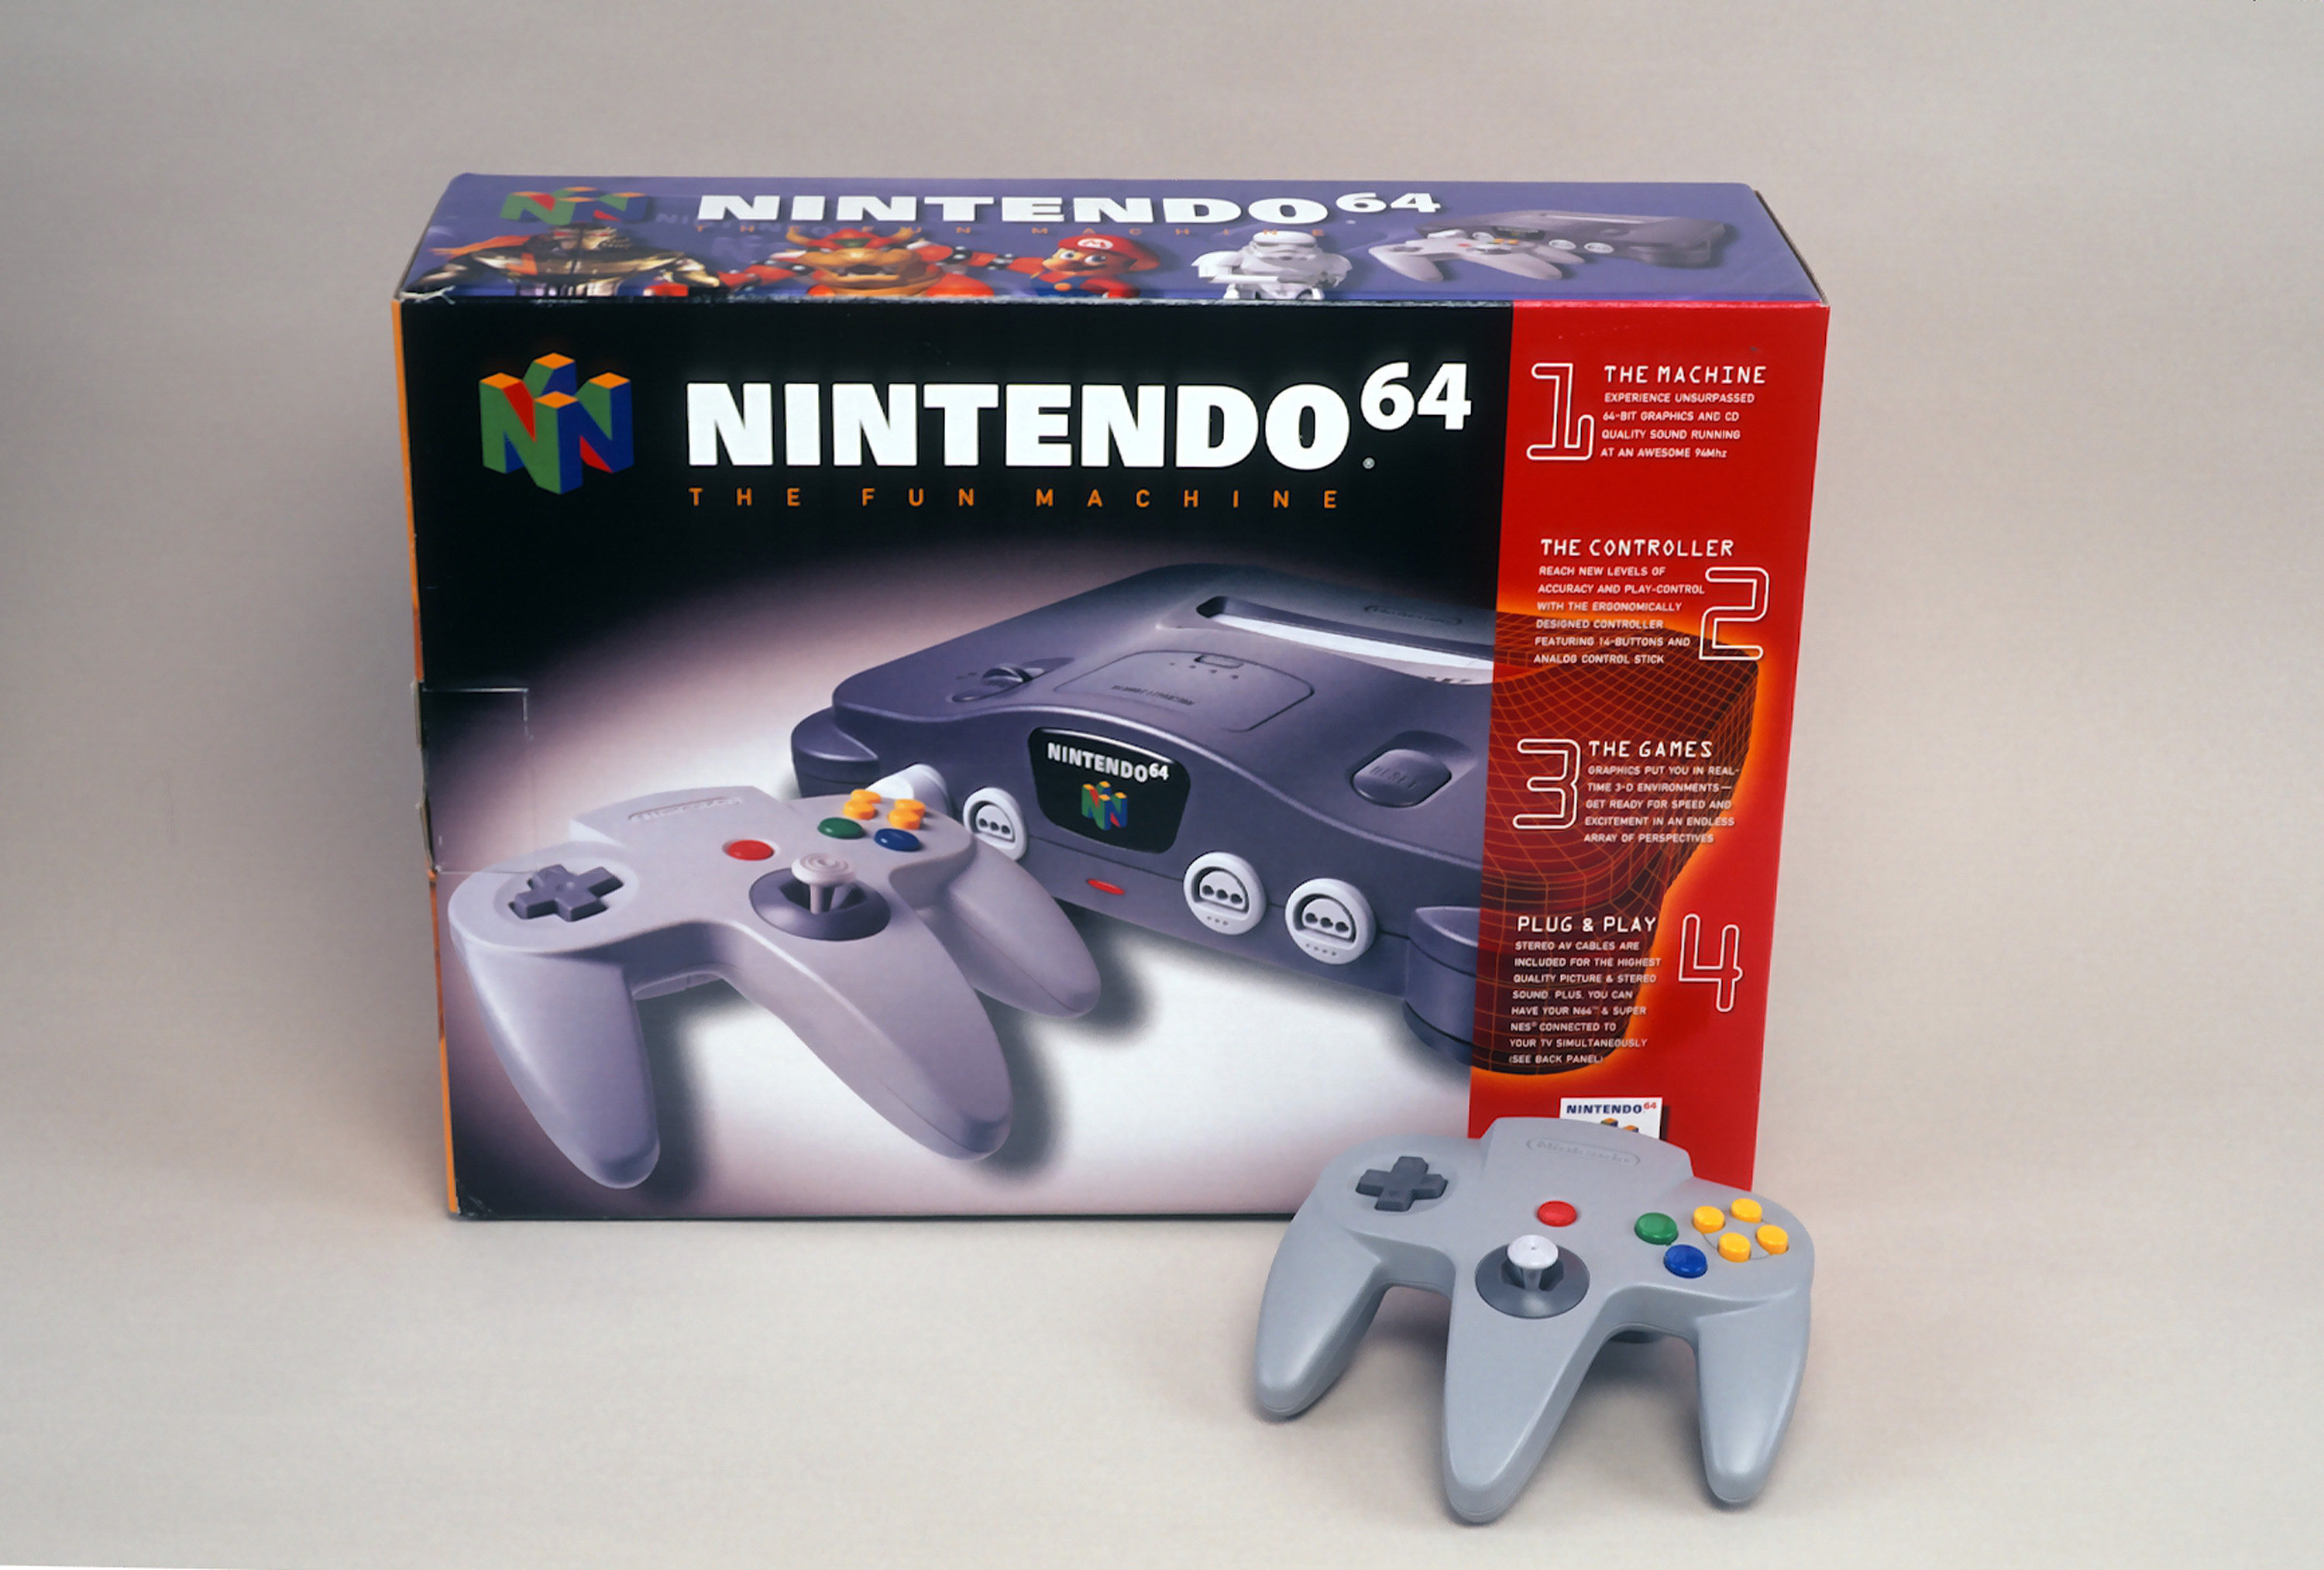 The Nintendo 64 broke new ground when it was released in 1996 and a number of its games are considered the best ever made, including Super Mario 64 and GoldenEye 007. Photo: Nintendo